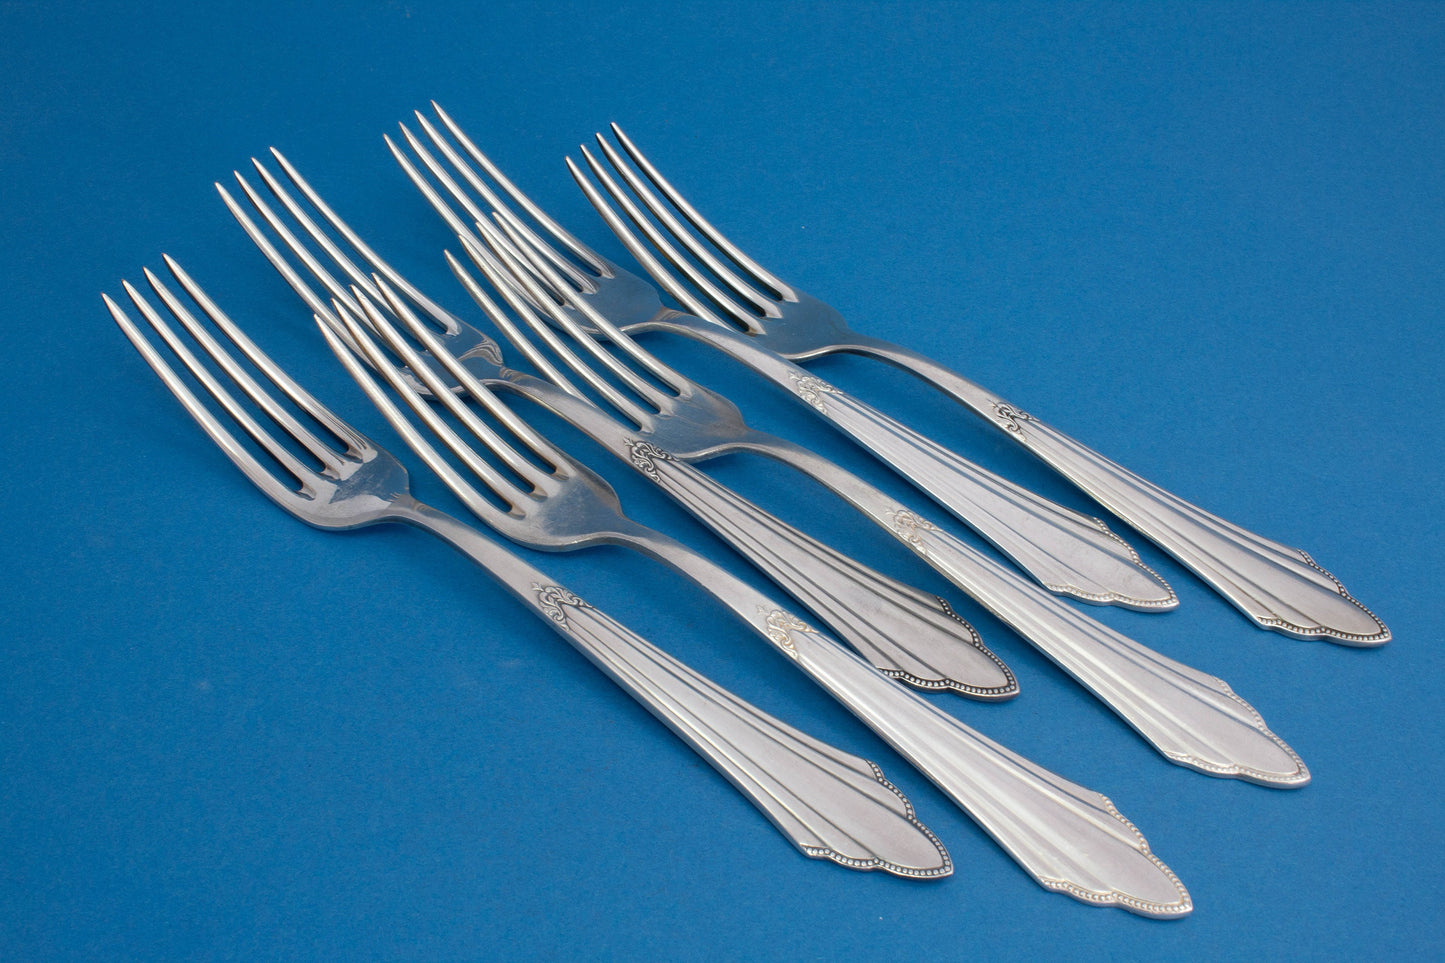 6 table forks from WMF 900, silver-plated forks, fan pattern